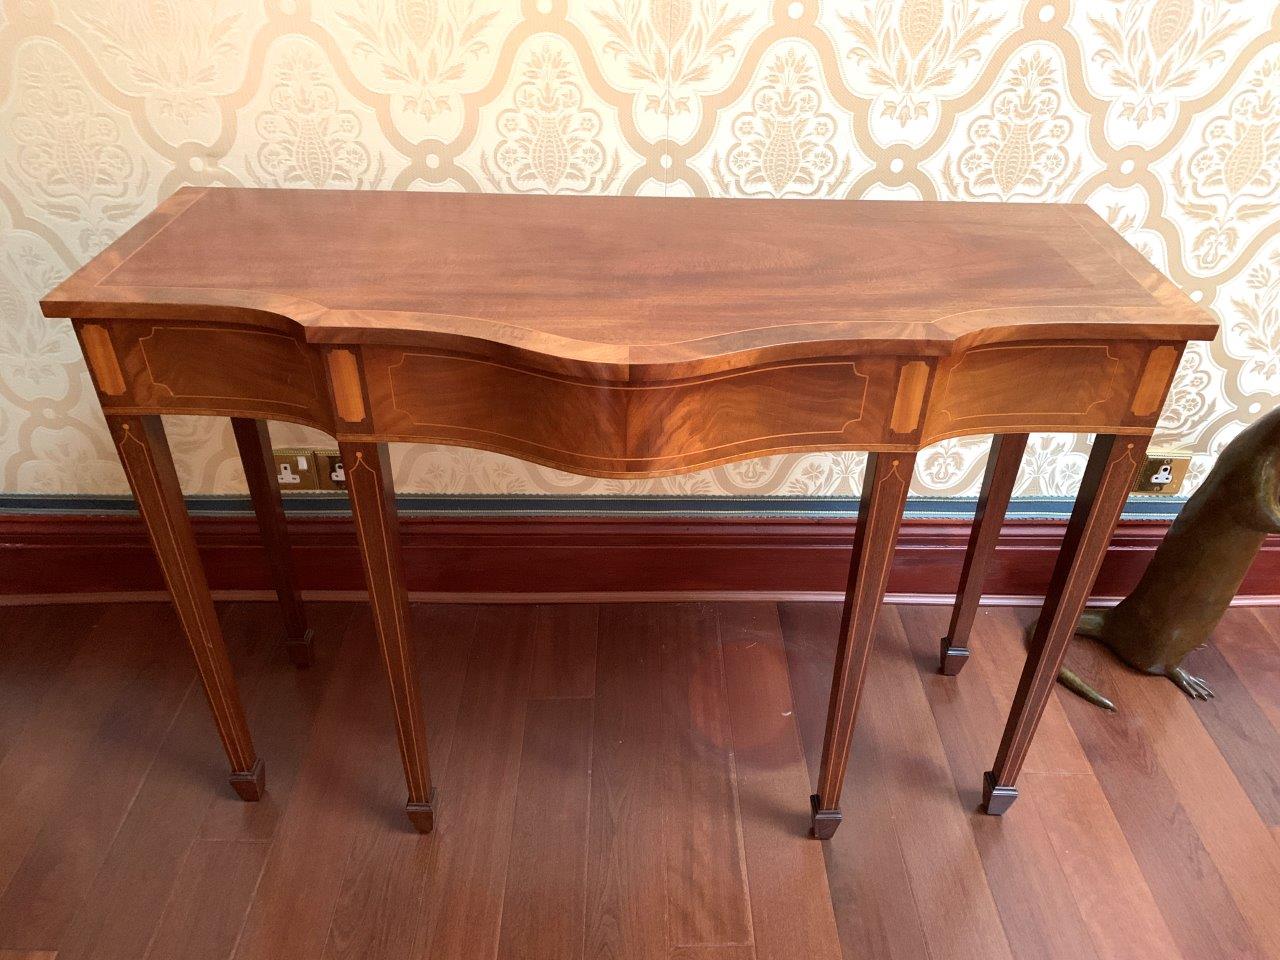 Pair of Georgian style inlaid console tables